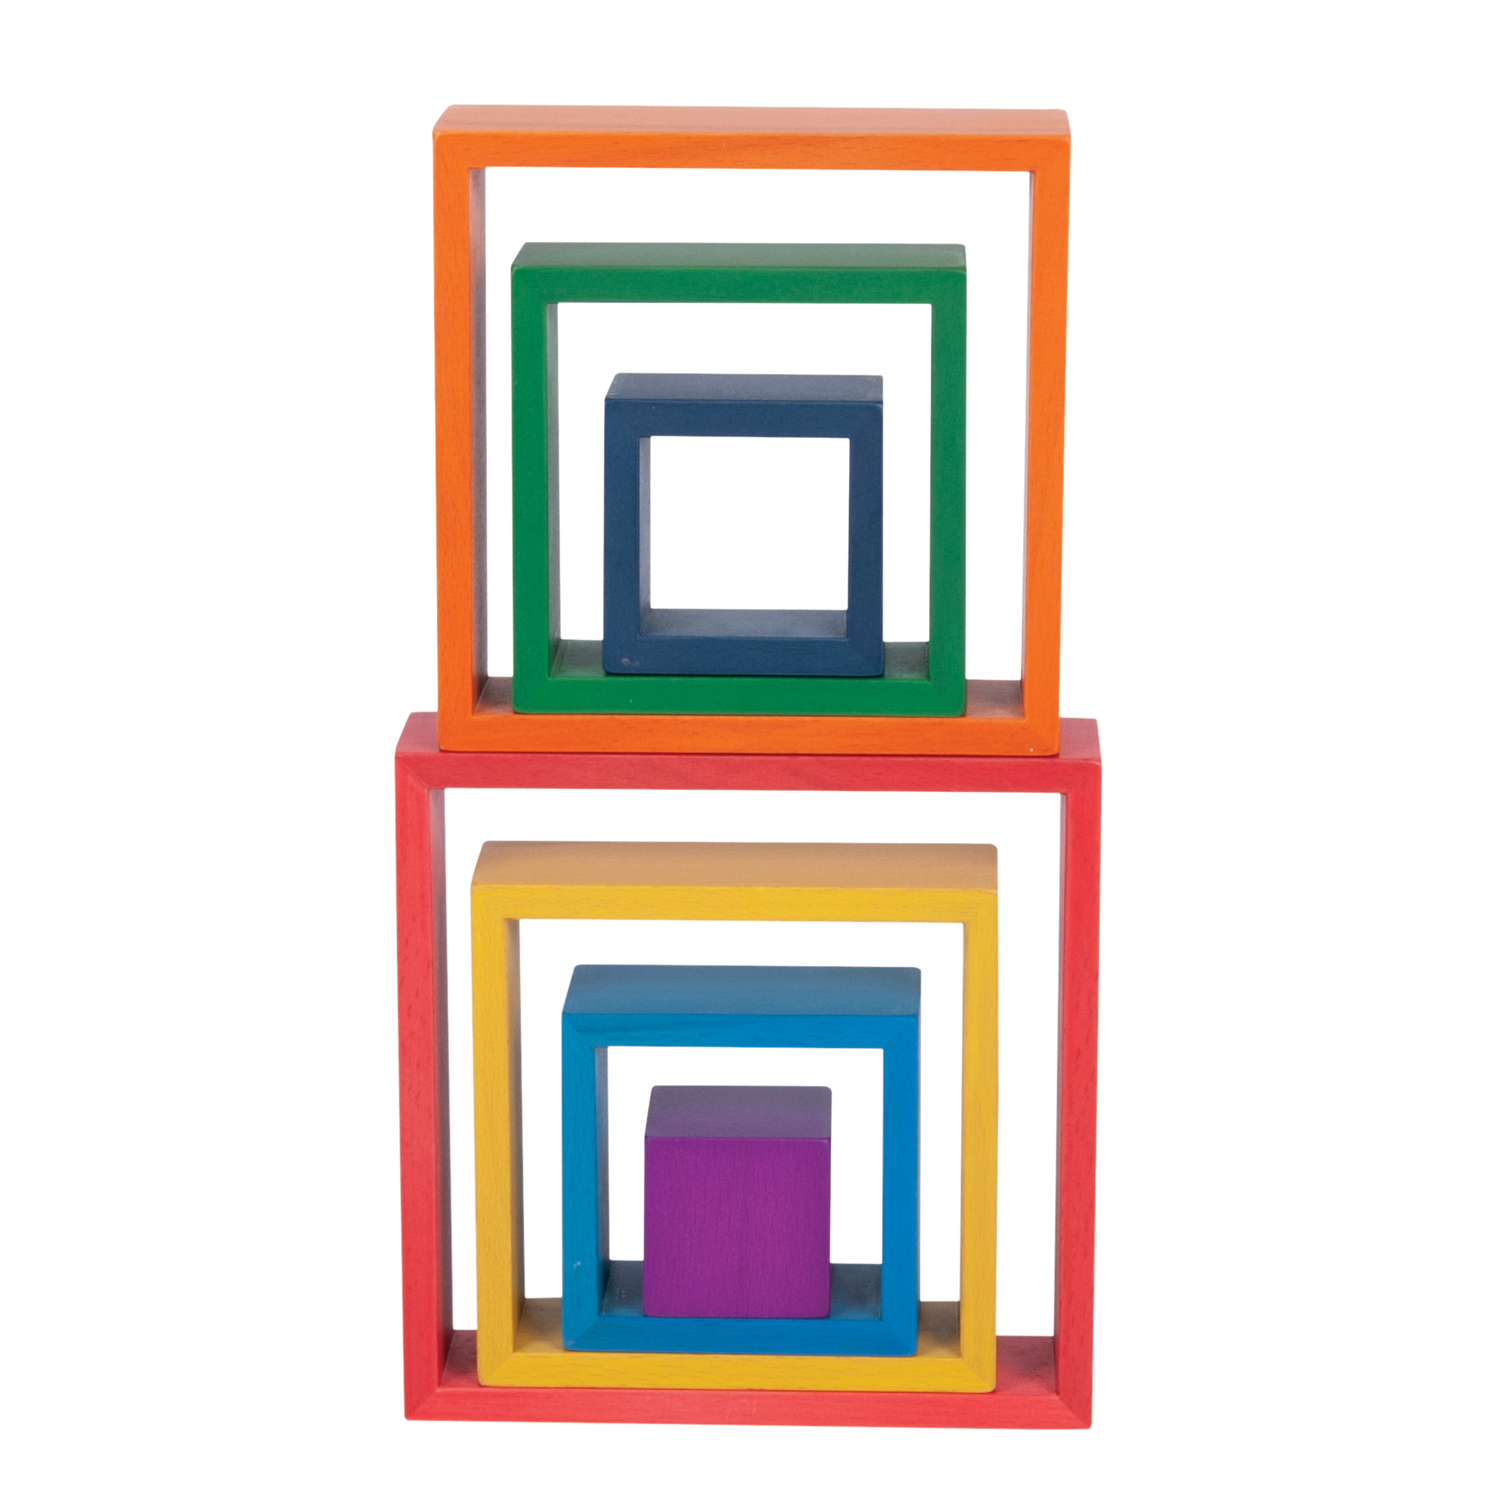 TickiT Wooden Rainbow Architect Squares - Set of 7 image number null